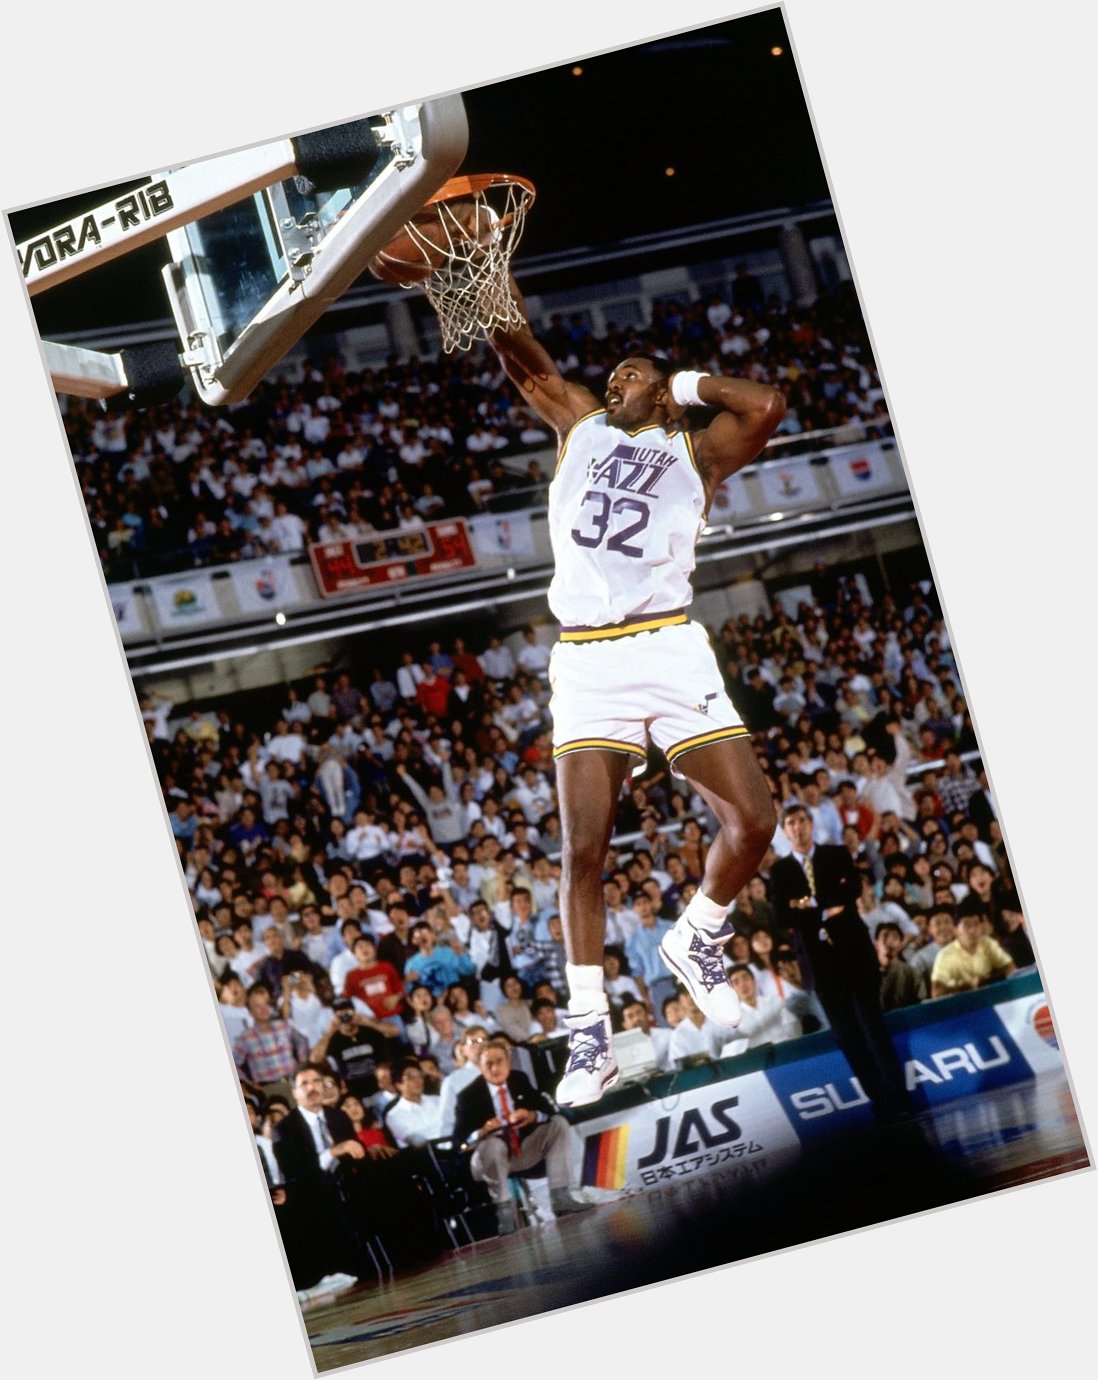 Happy Birthday to the one who always delivers, the Mailman, Karl Malone!  (  